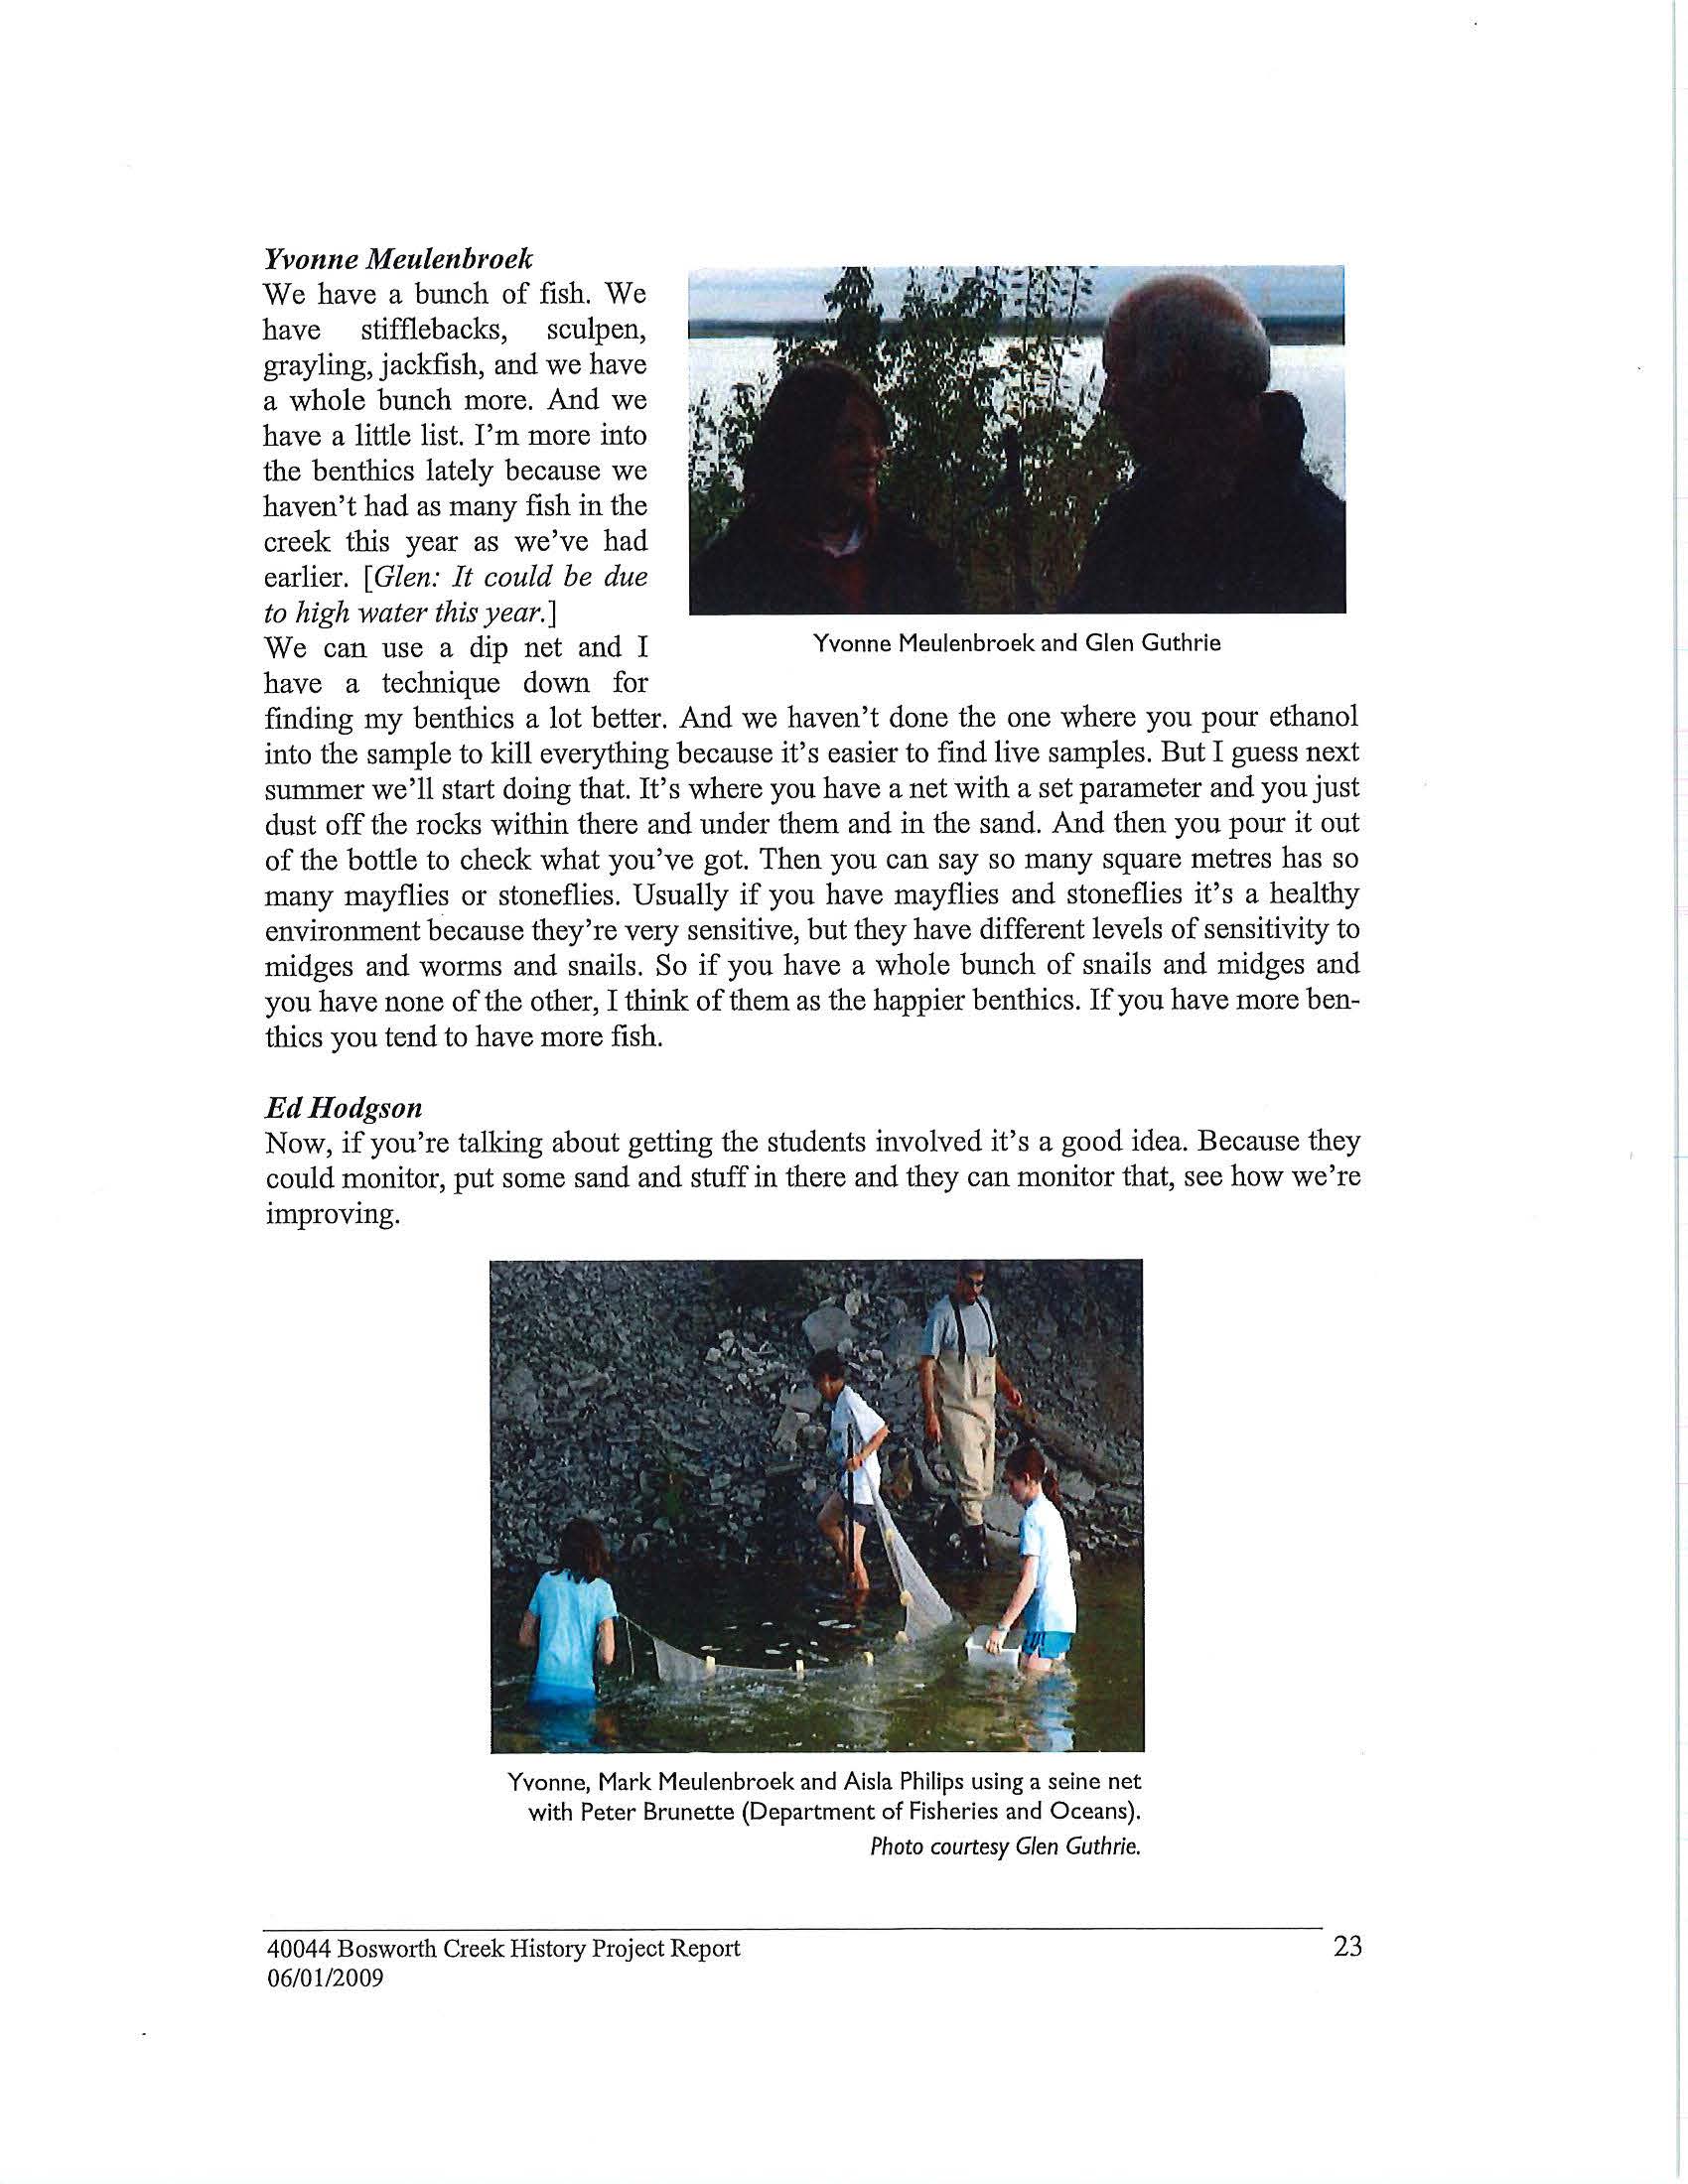 Bosworth Creek History Project Page 28